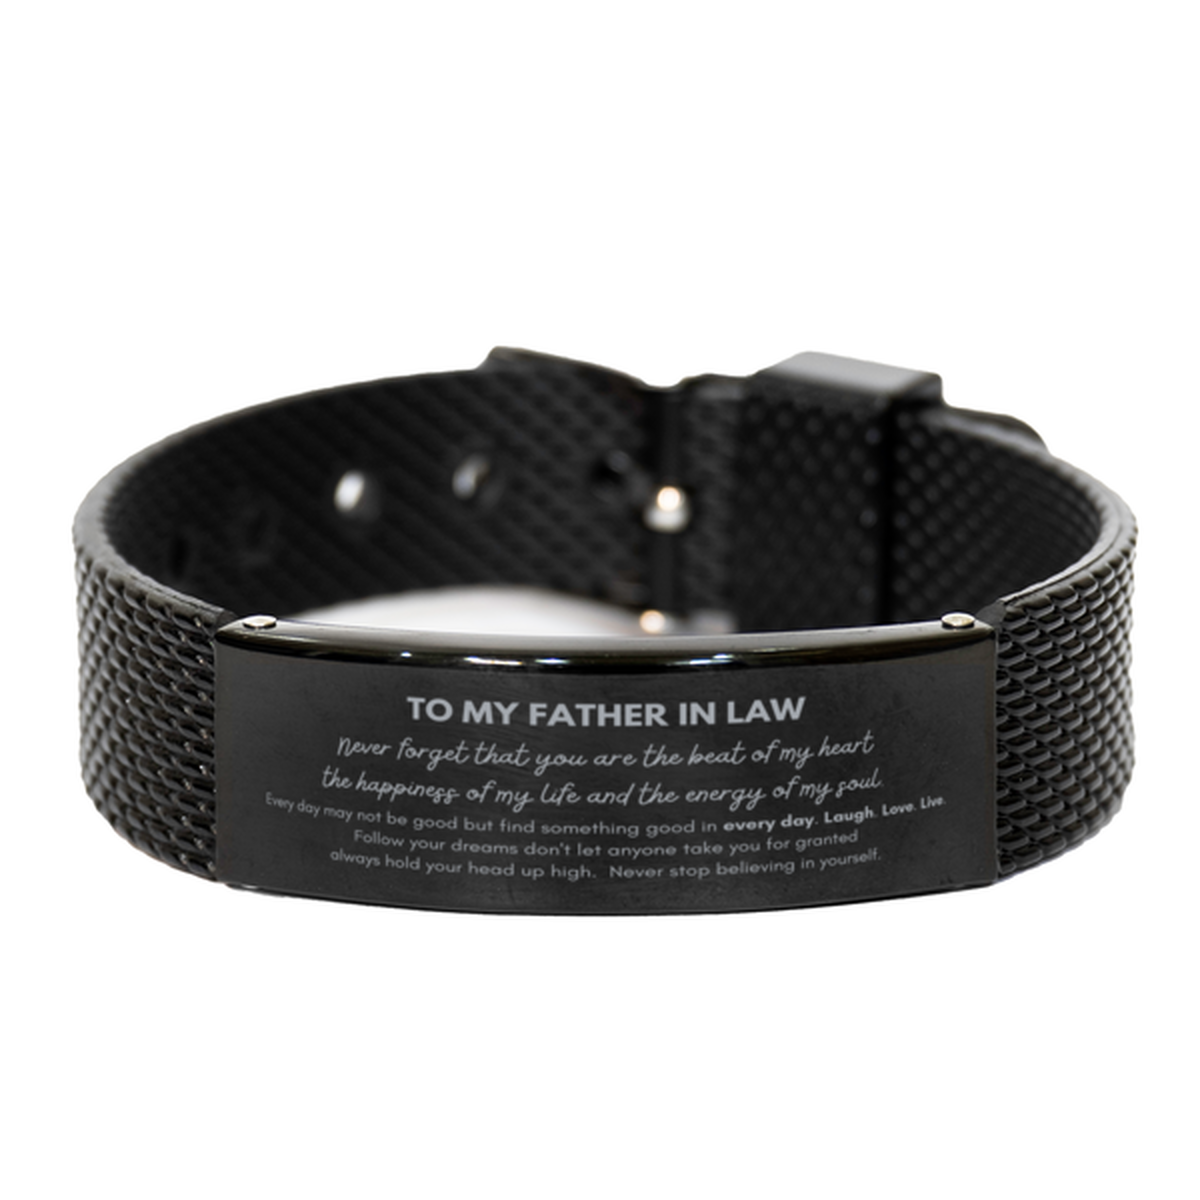 To My Father In Law Bracelet Gifts, Christmas Father In Law Black Shark Mesh Bracelet Present, Birthday Unique Motivational For Father In Law, To My Father In Law Never forget that you are the beat of my heart the happiness of my life and the energy of my